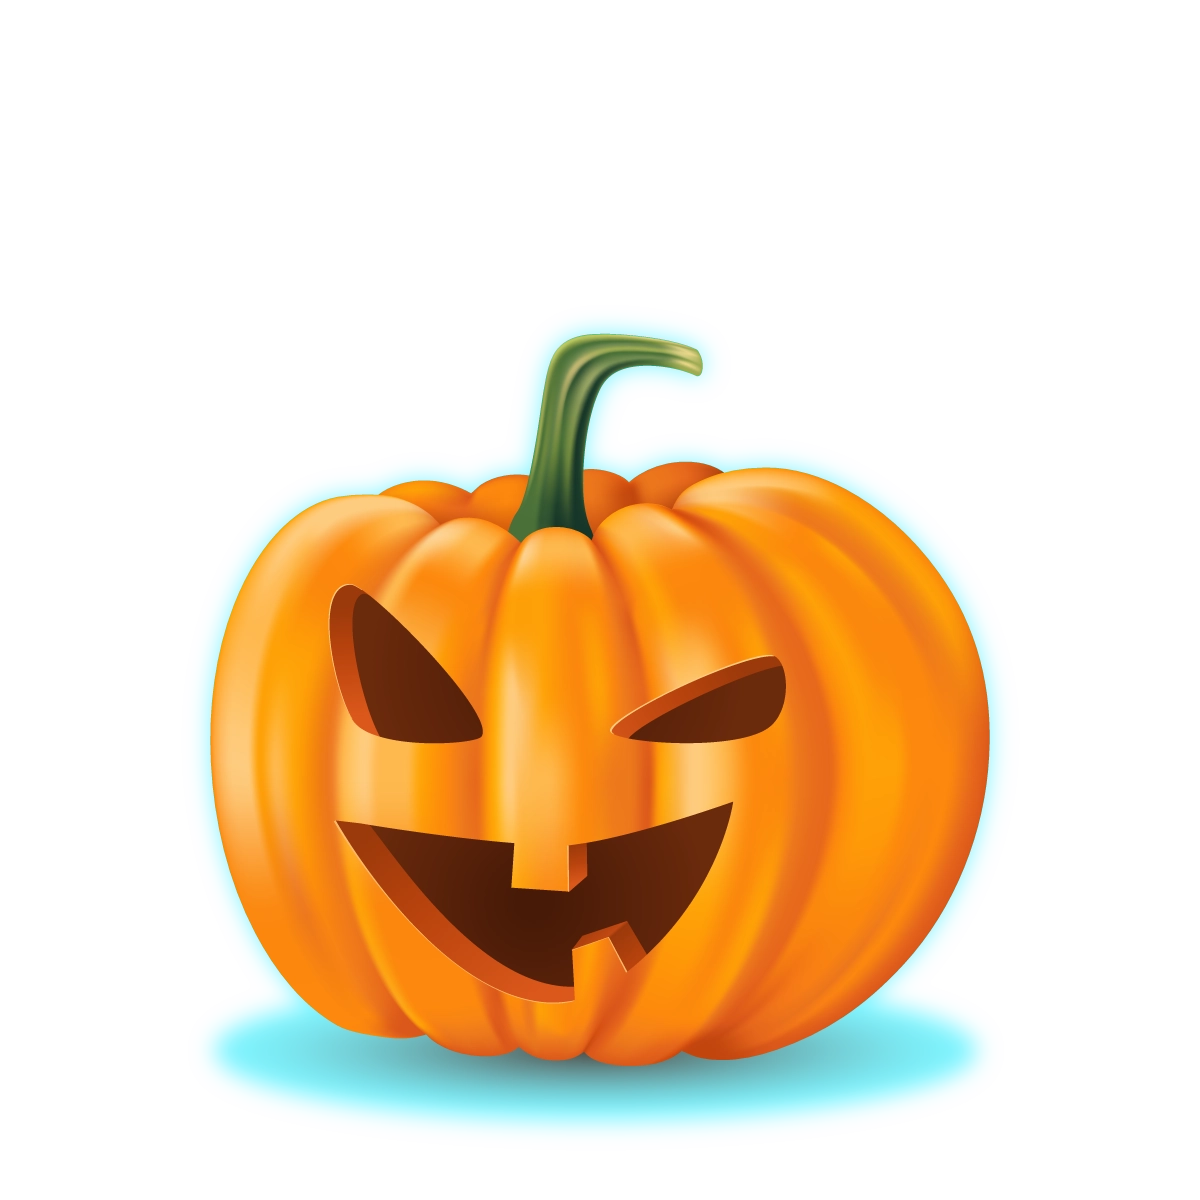 pumpkin hover and selected state image